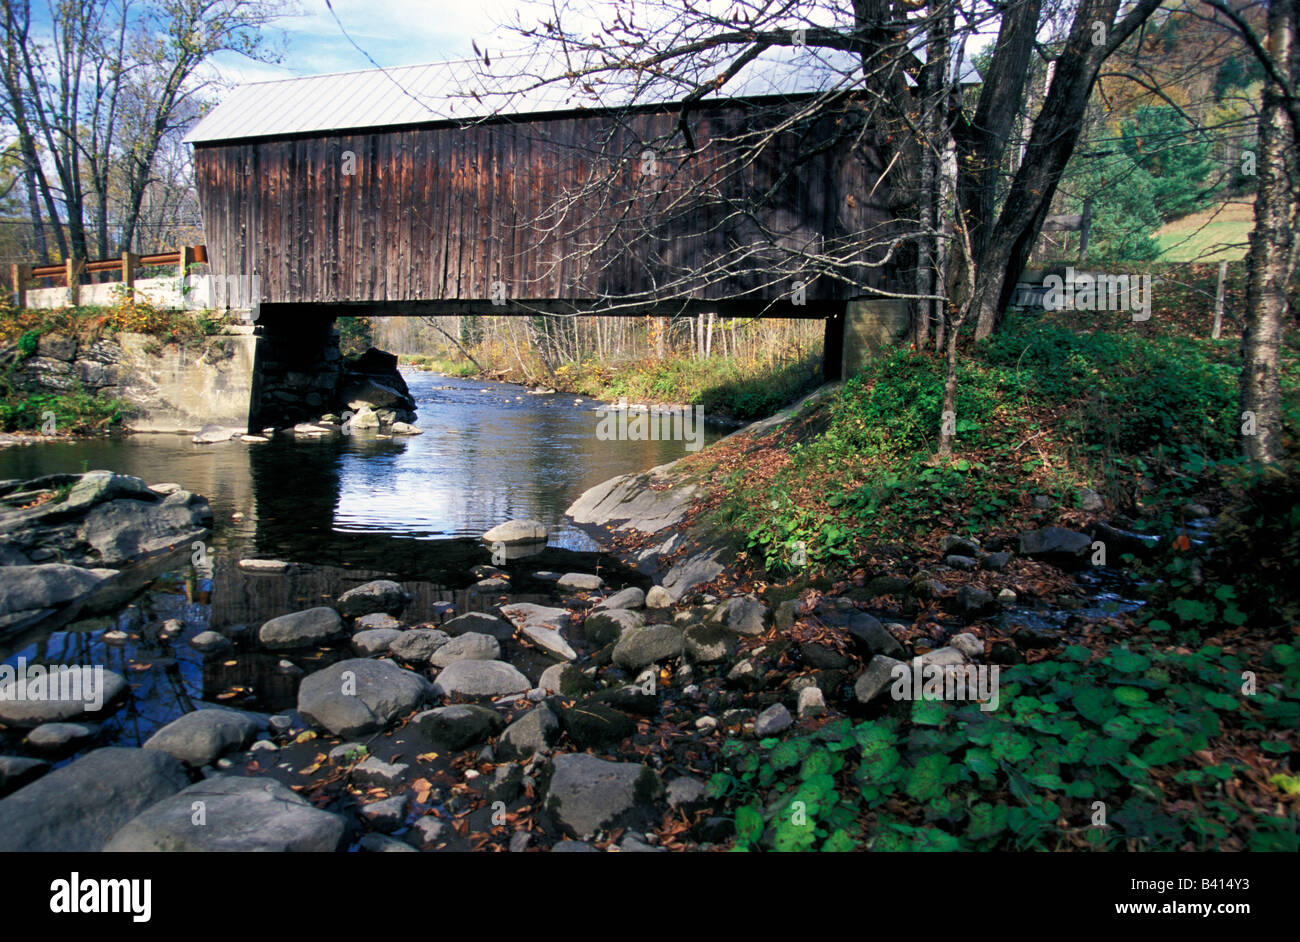 North America, United States, Vermont, Chelsea. Moxley Covered Bridge built in 1883. Stock Photo